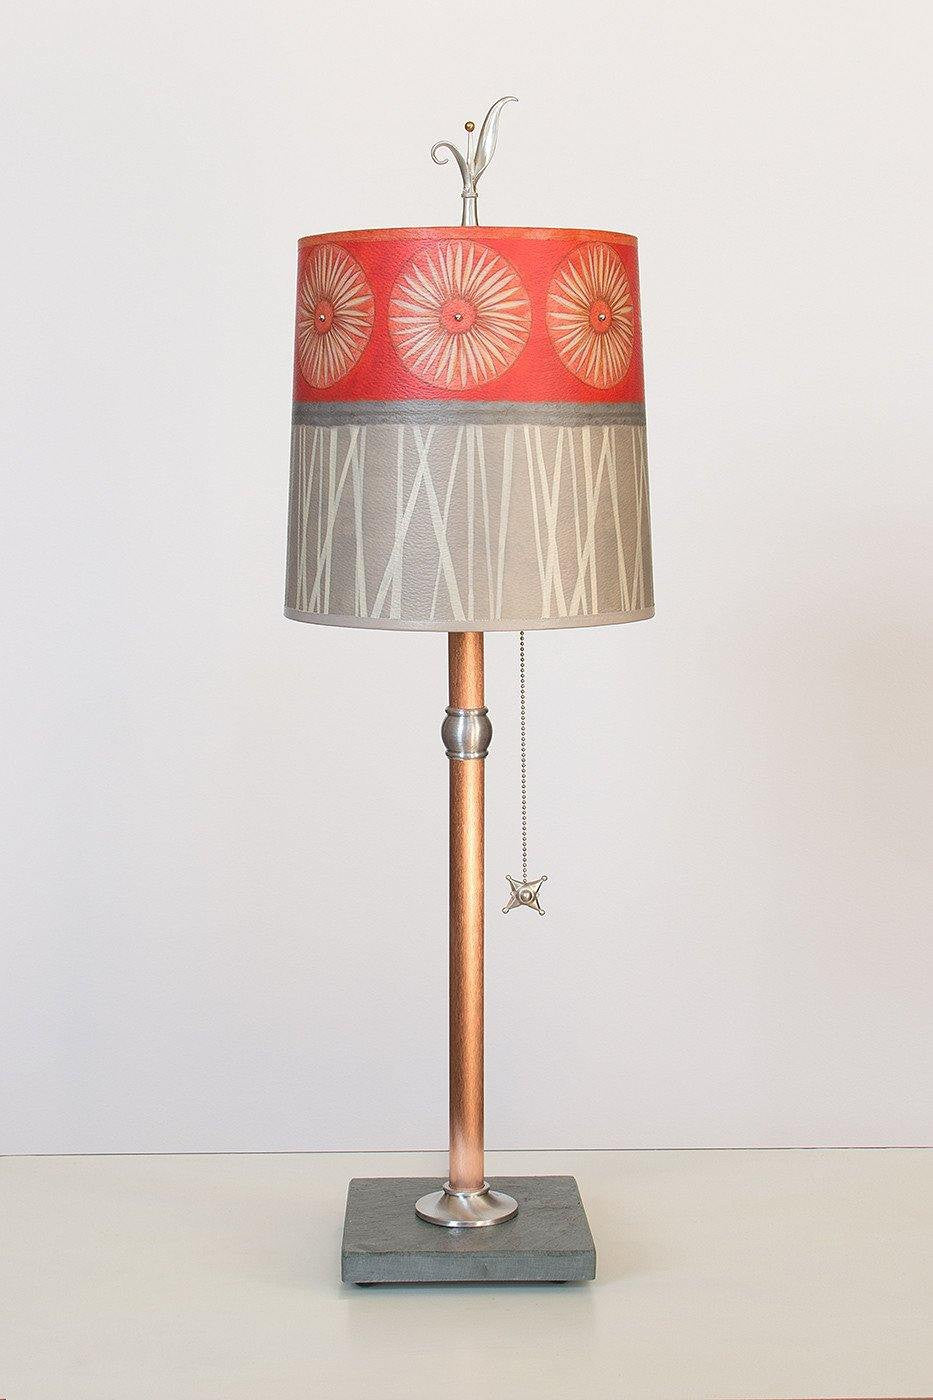 Janna Ugone & Co Table Lamps Copper Table Lamp with Medium Drum Shade in Tang